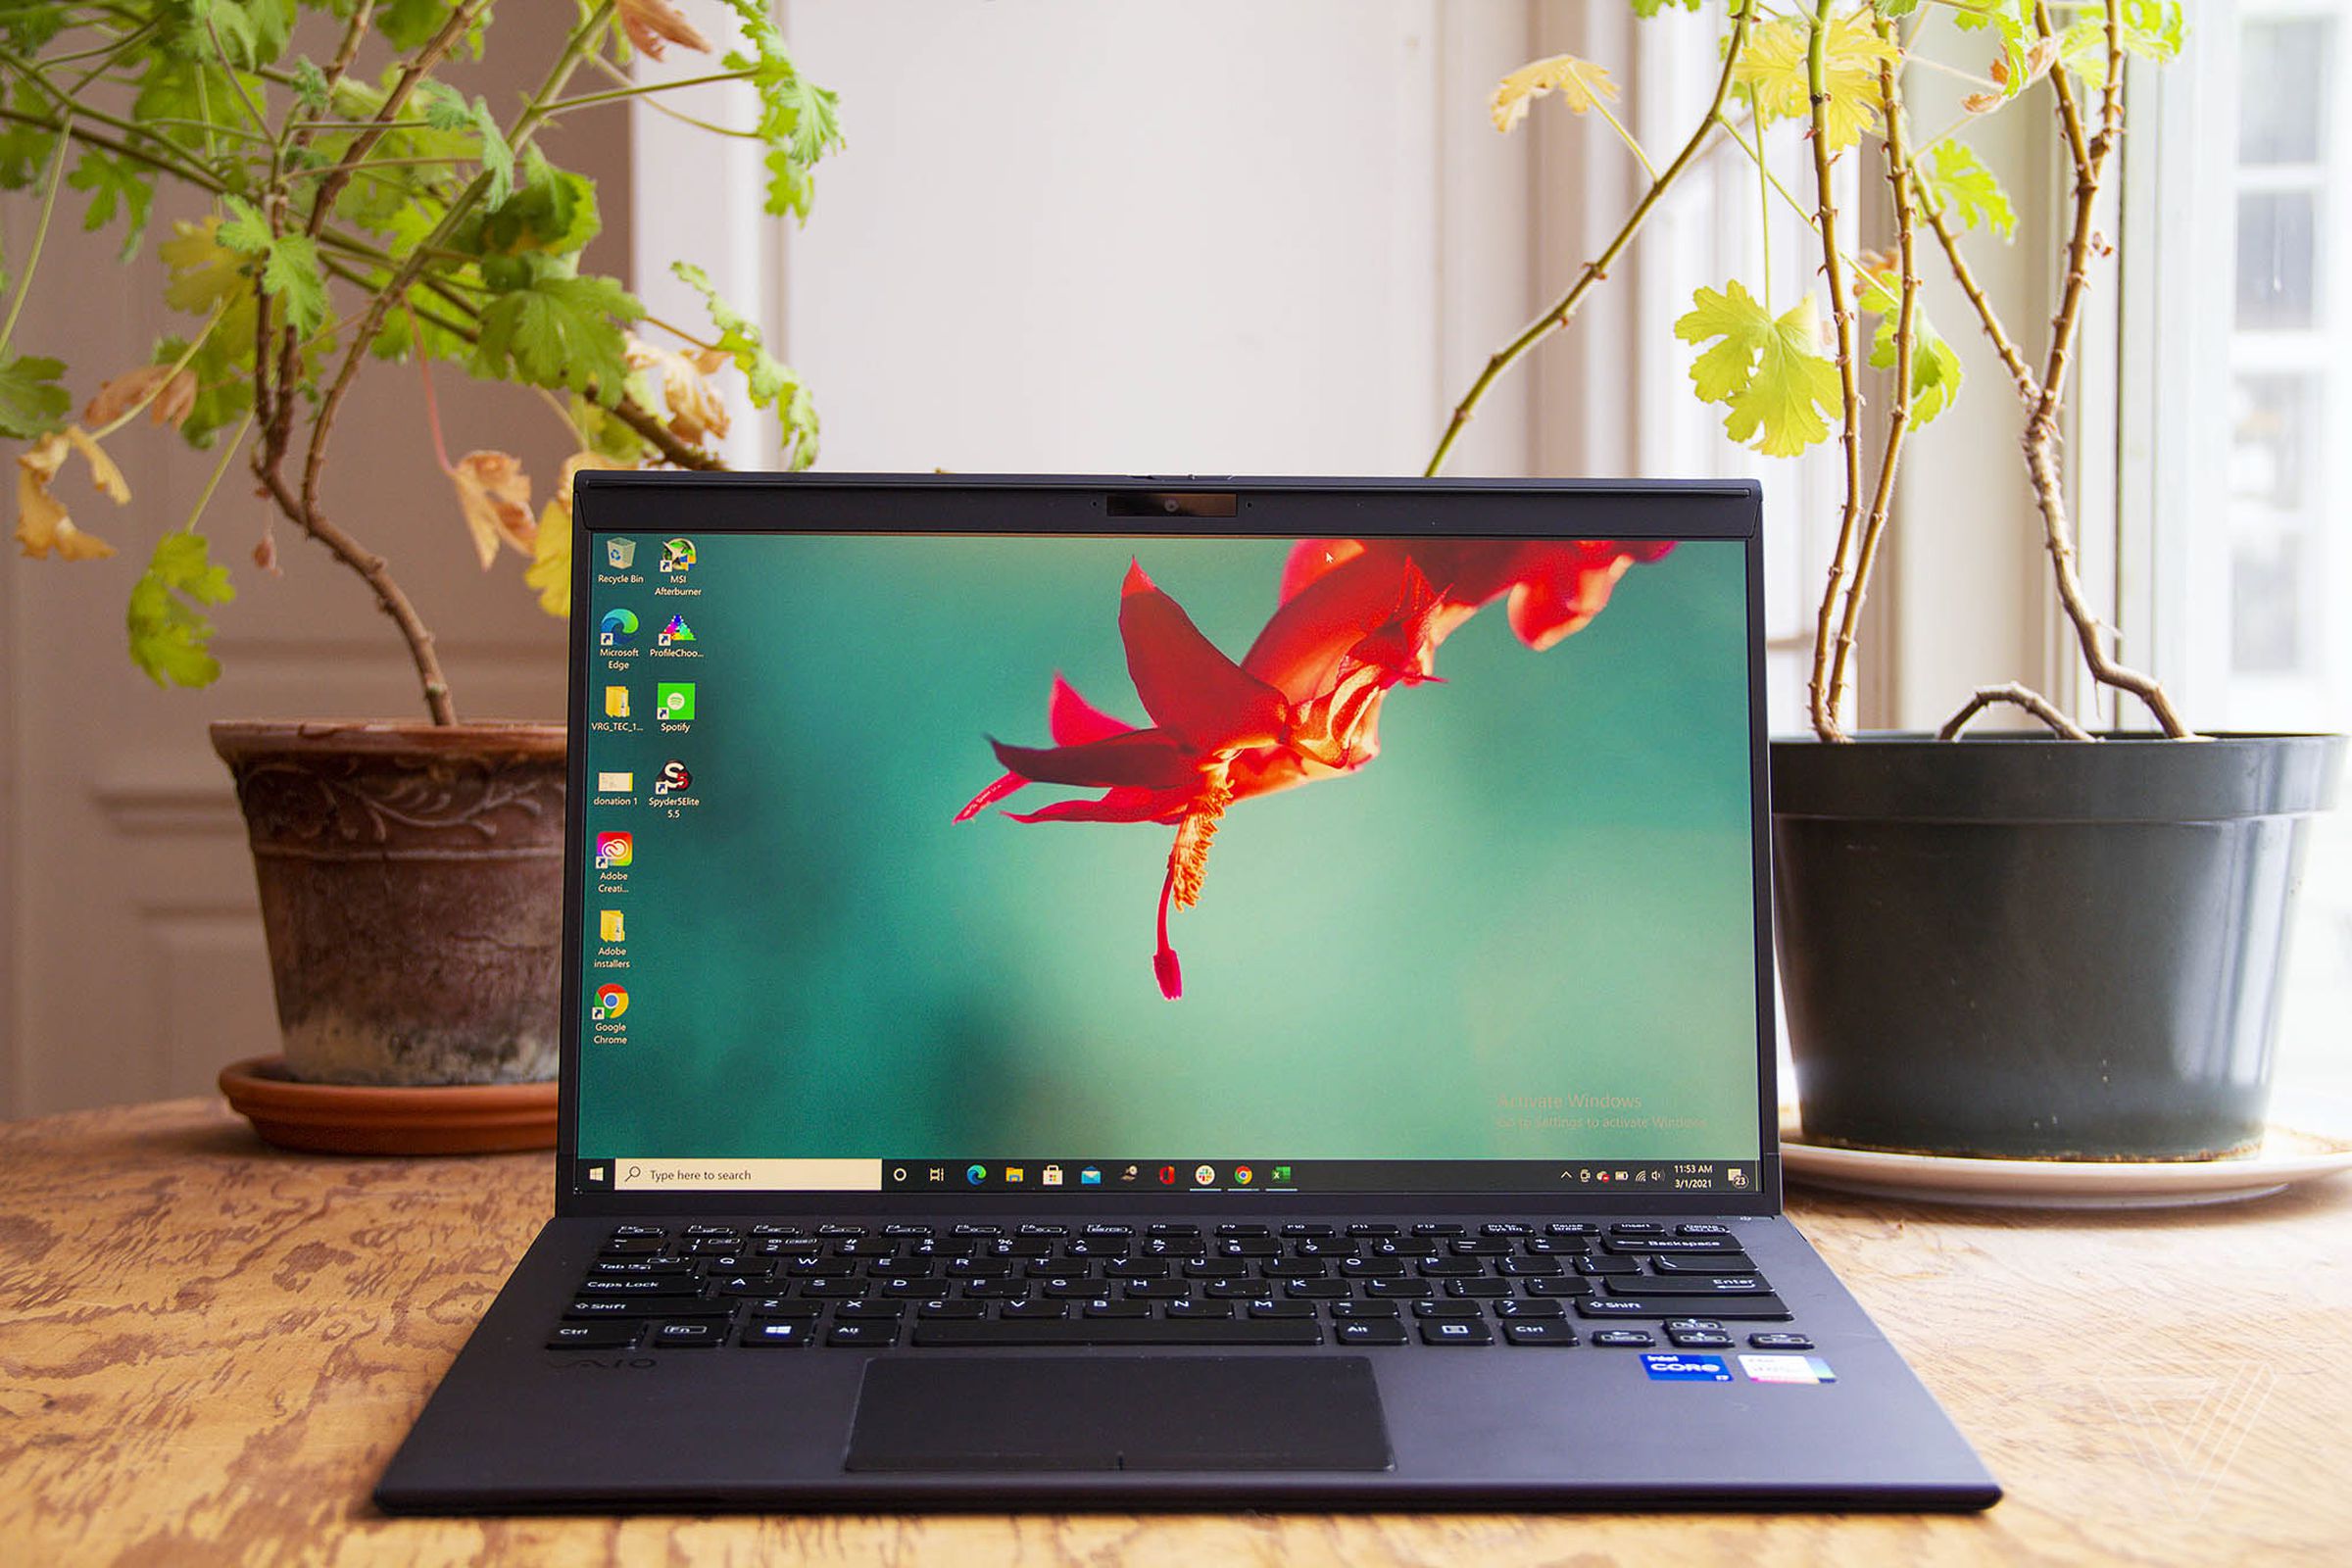 The Vaio Z laptop on a table with two plants in the background. The screen displays a red flower on a blue background.